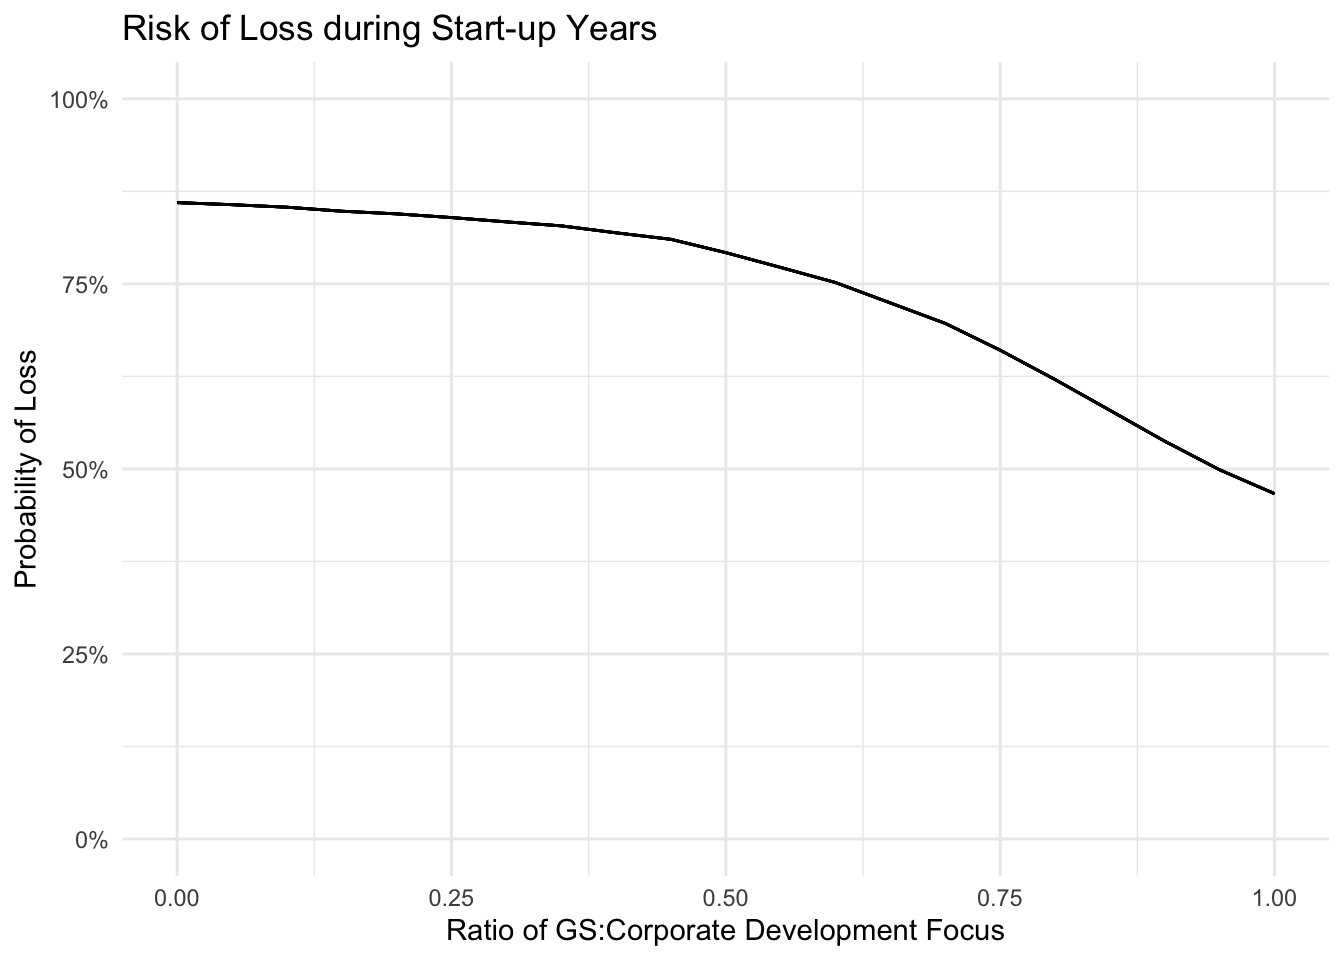 Loss here defined as any annual giving total less than the expected average given an equal distribution of focus between Giving Society and Corporate giving.